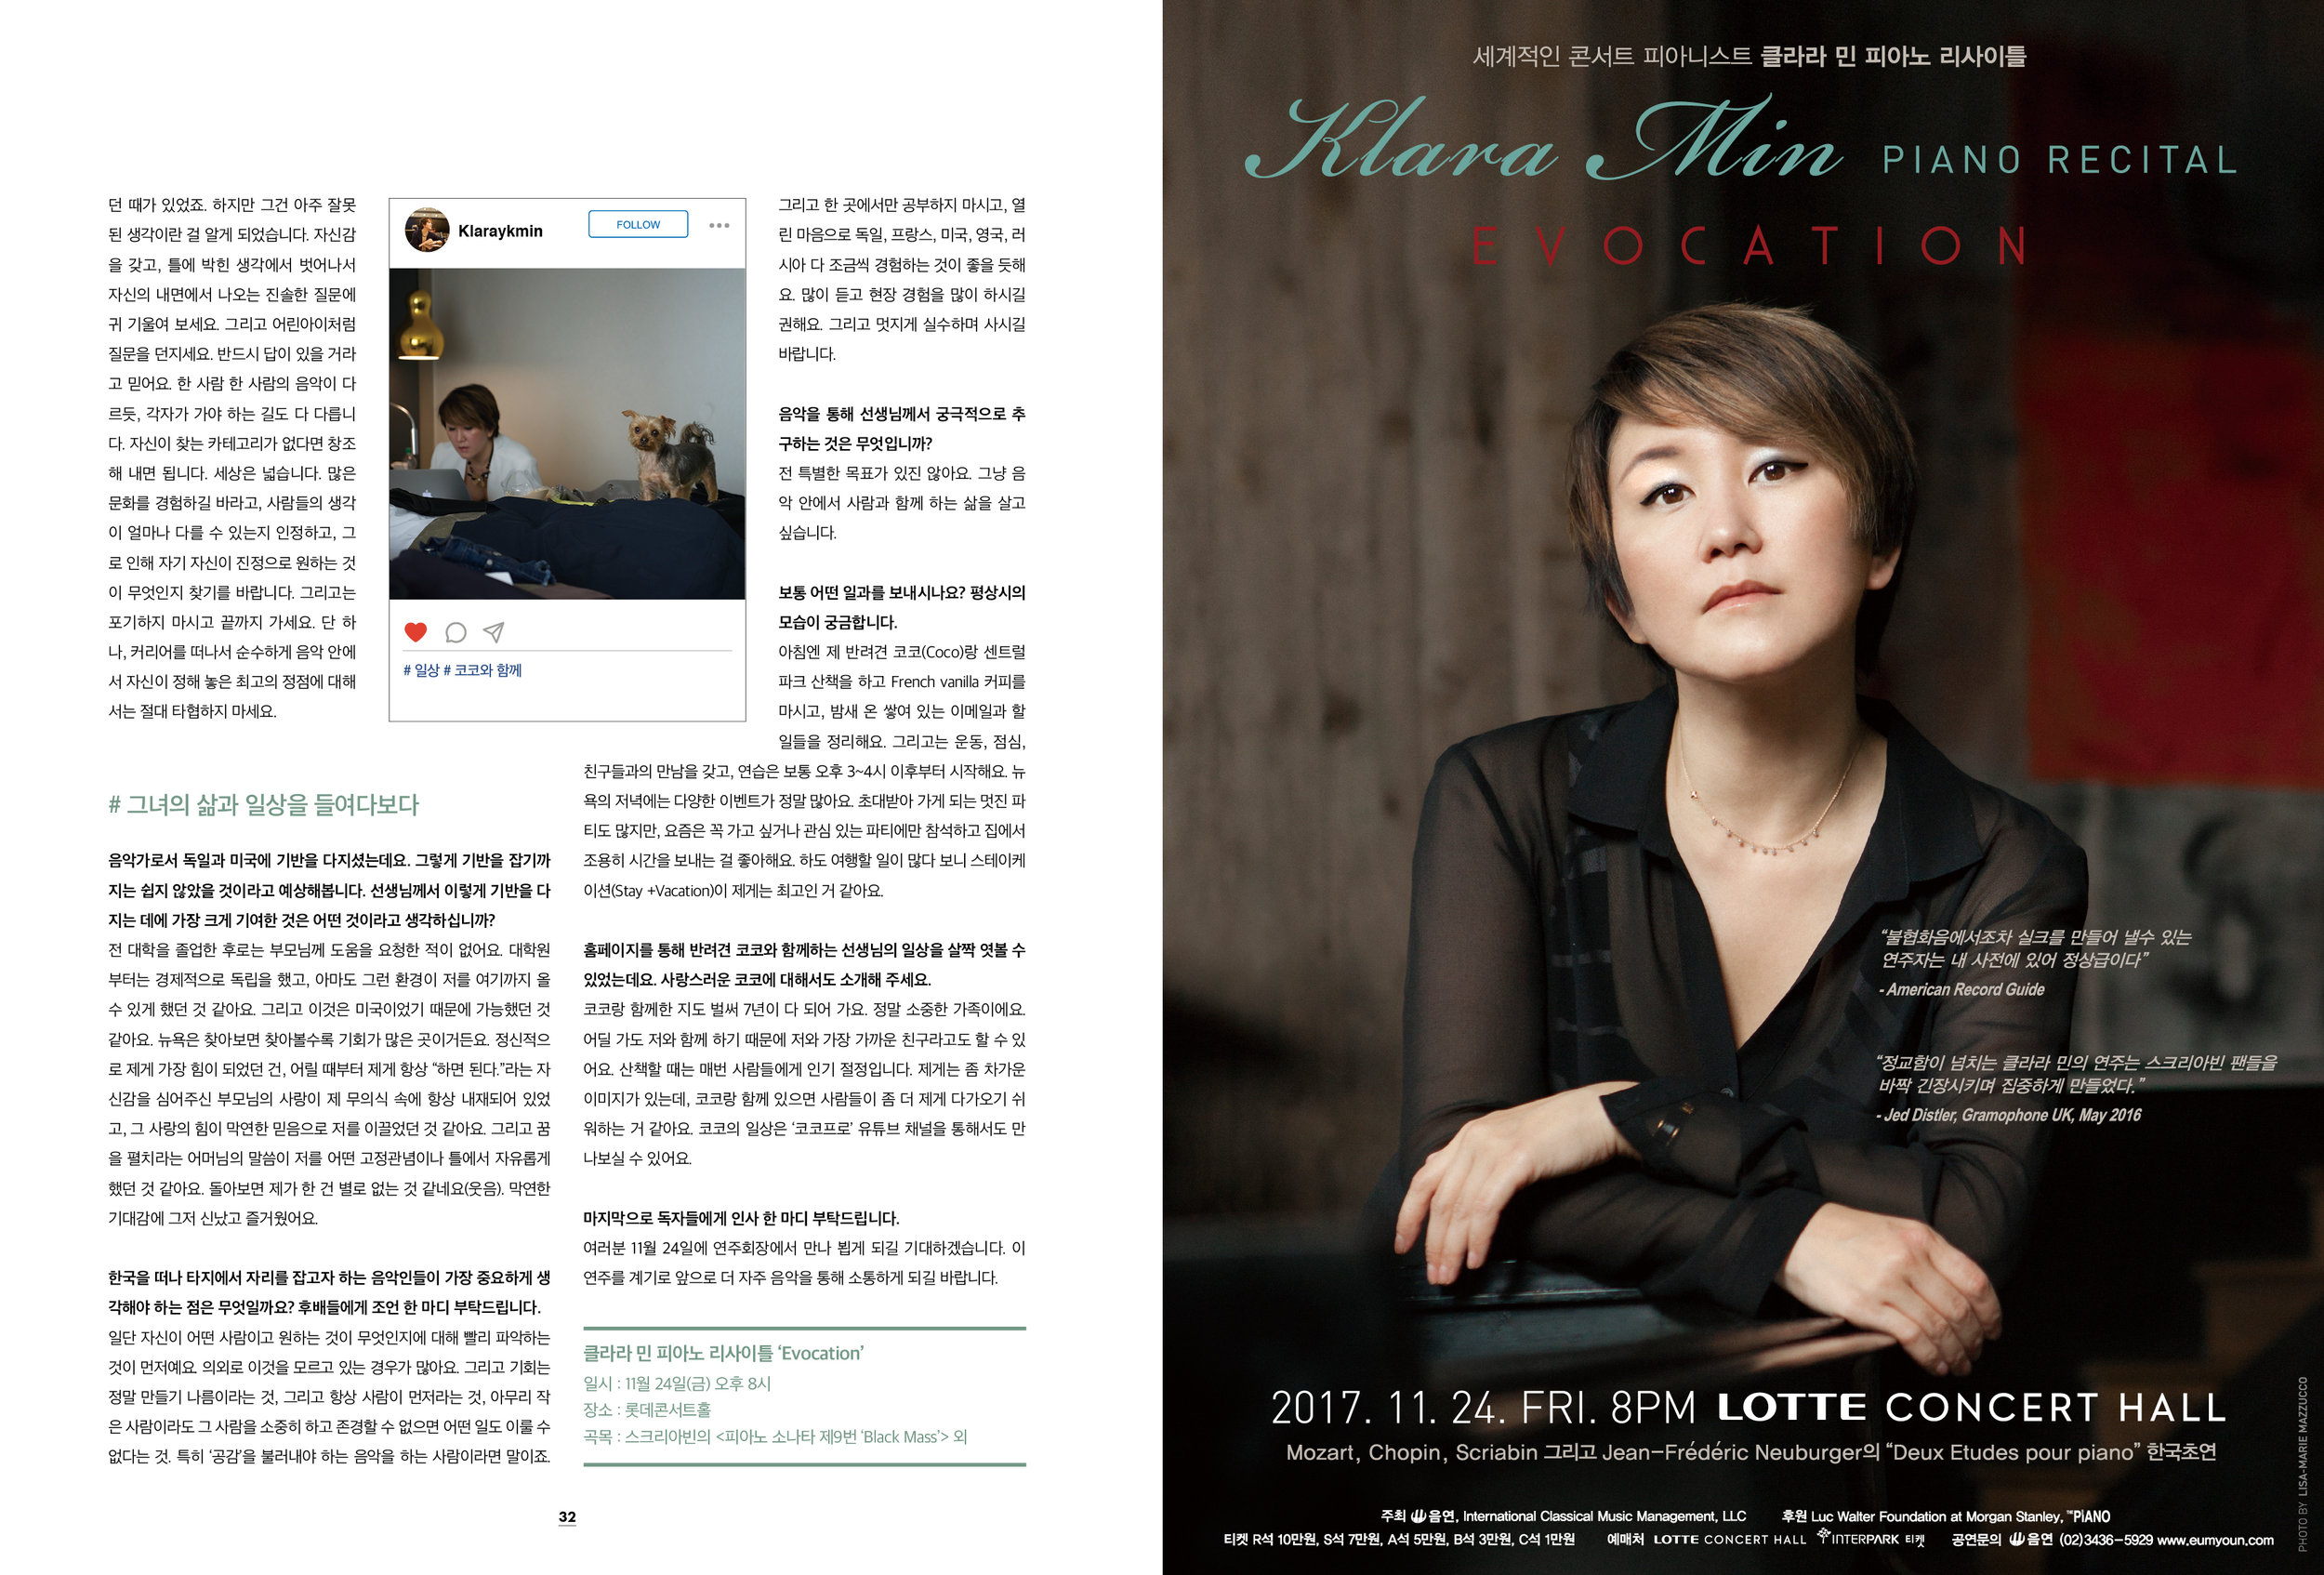   The Piano - Cover story and interview "What the generation wants: Creative Artist Klara Min"  